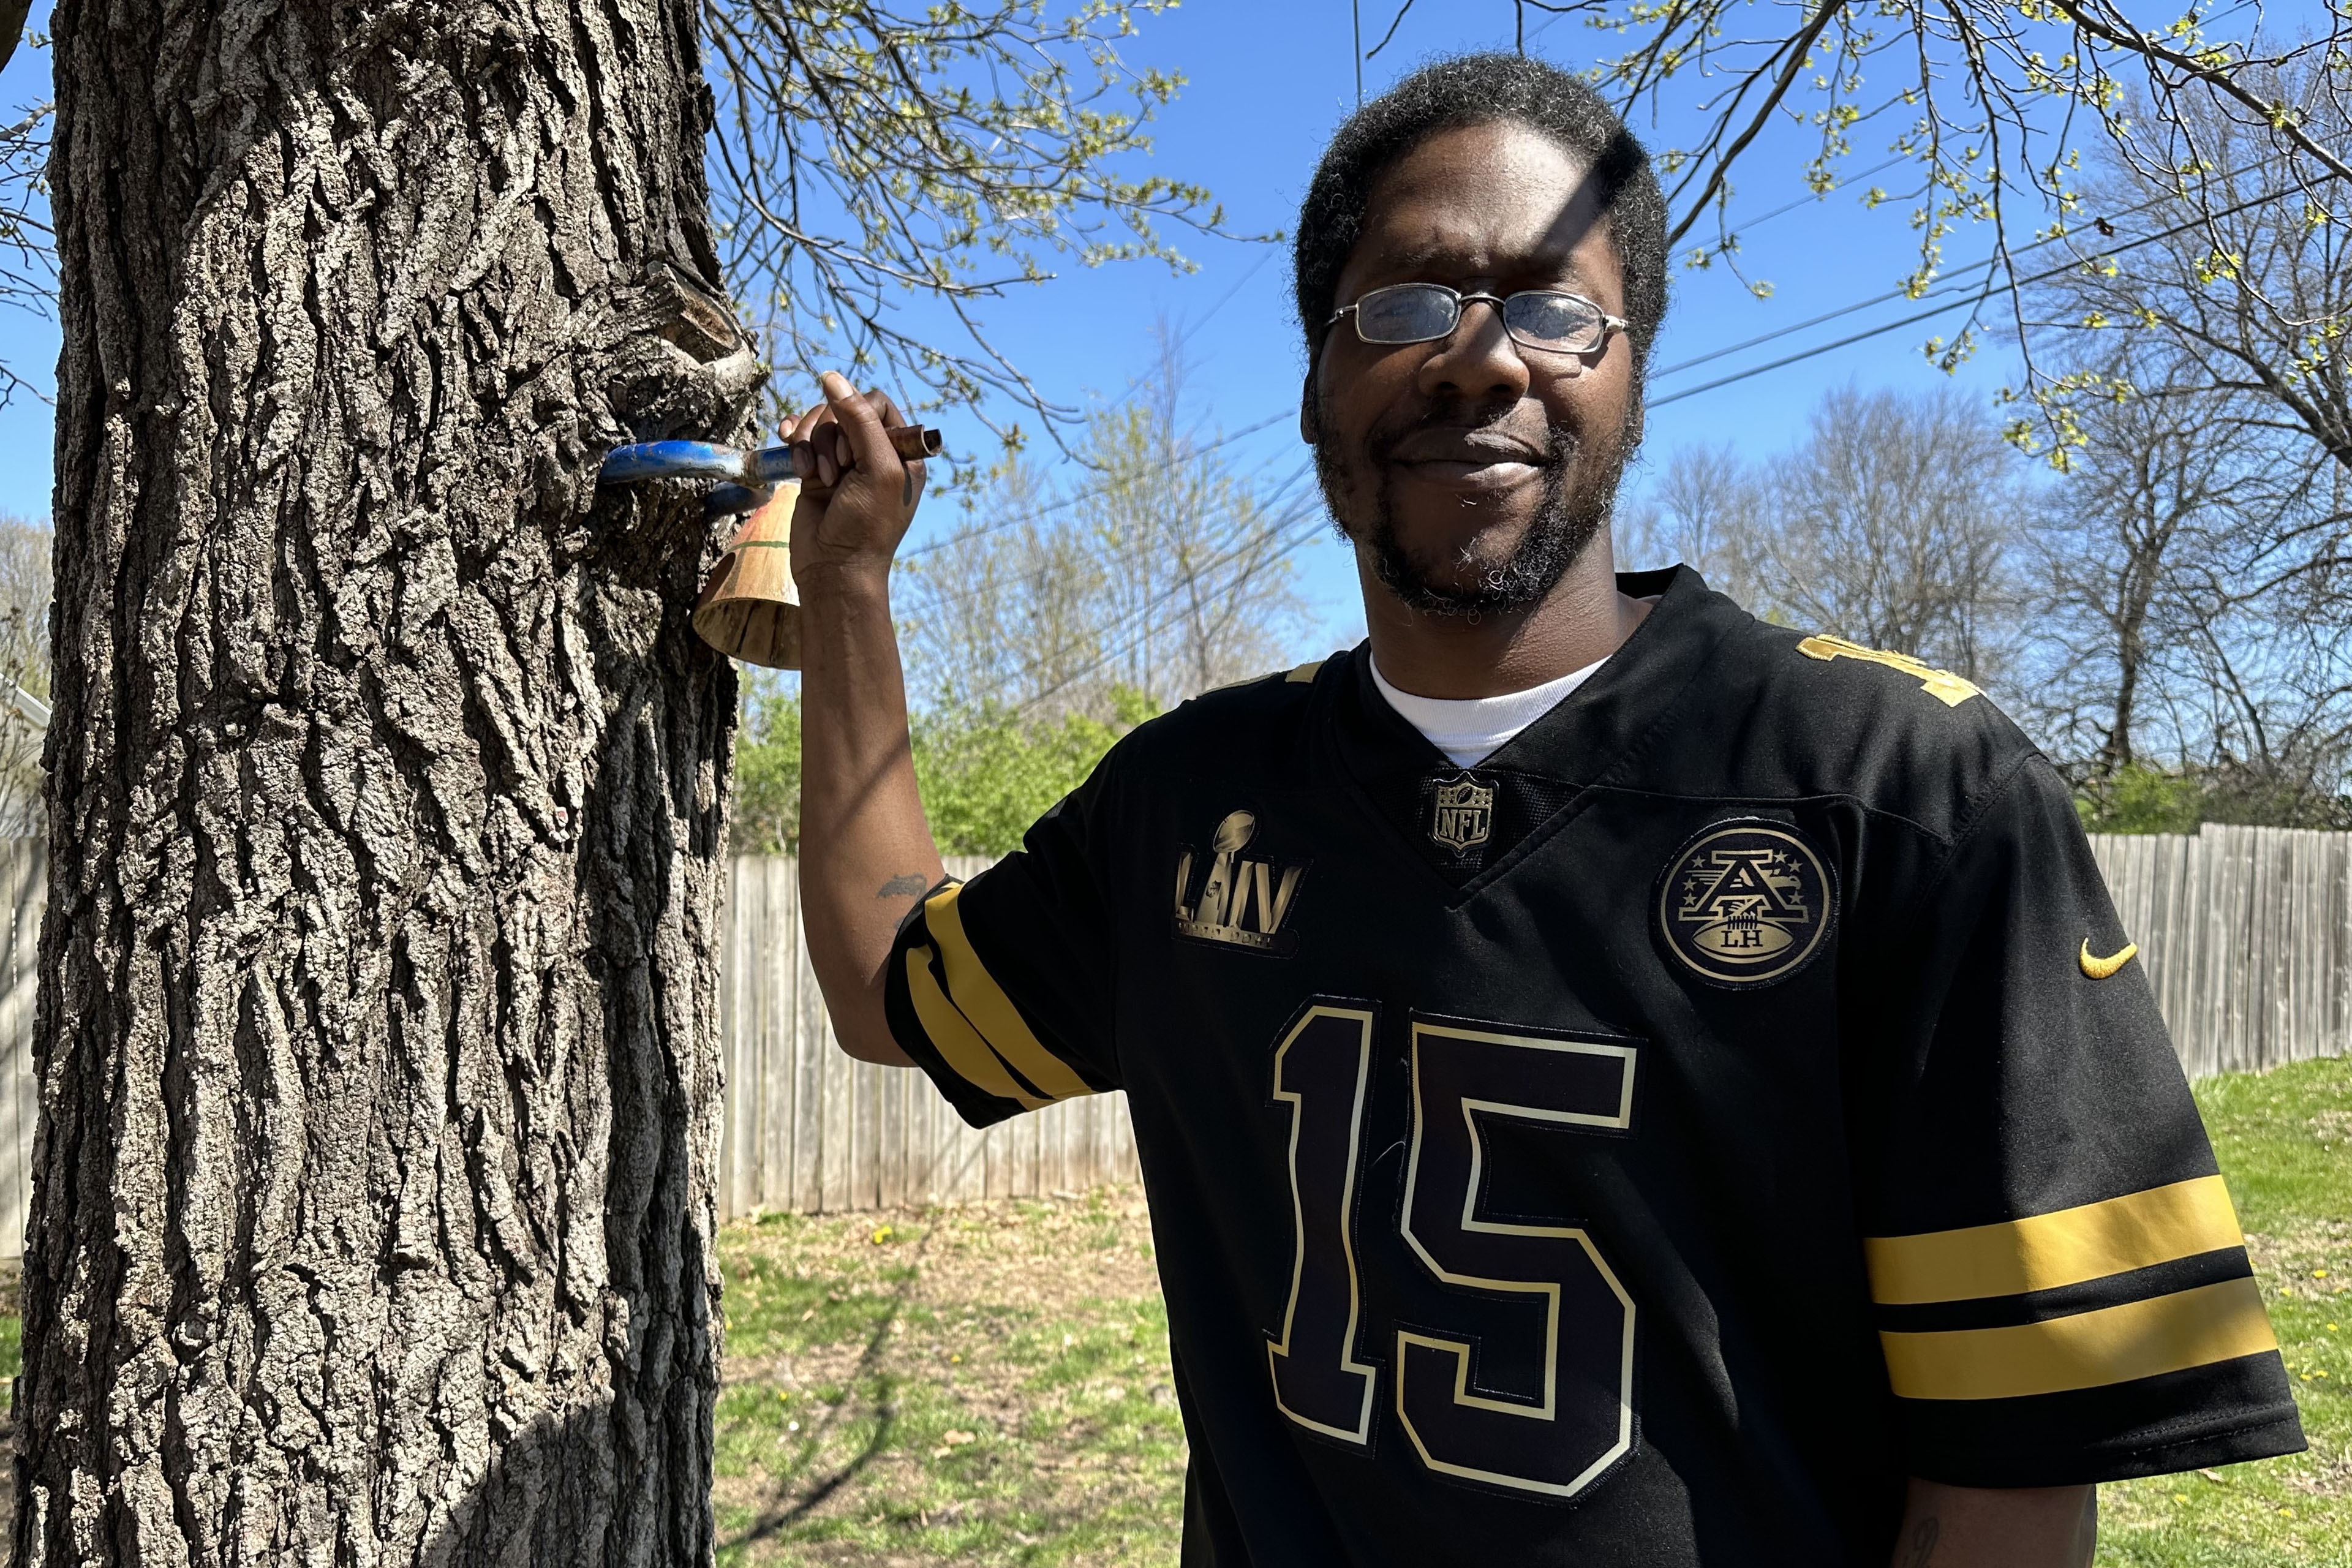 A man in glasses and a sports jersey stands next to a tree and poses for a photo.